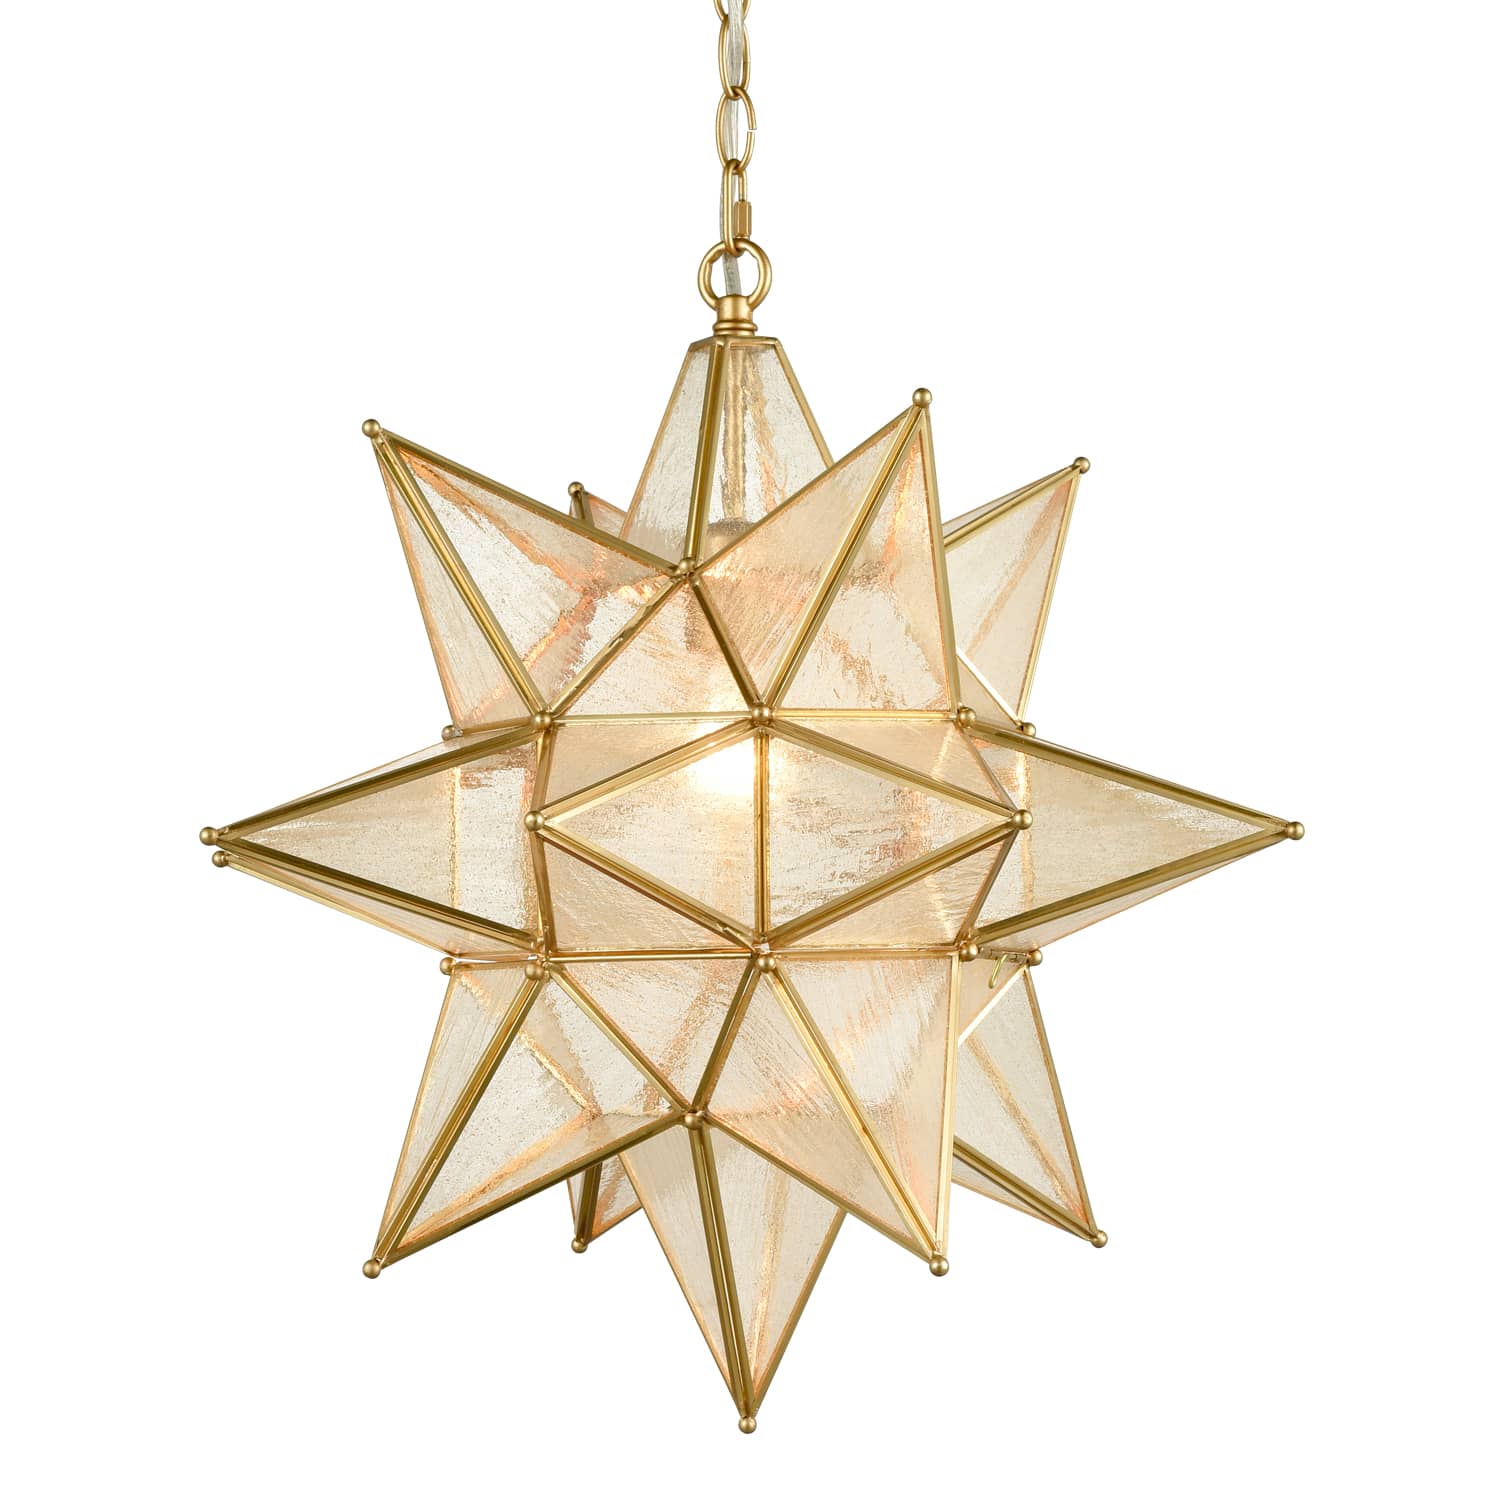 Moravian Star Pendant Chandelier Seeded Glass Gold Light 19 Inches